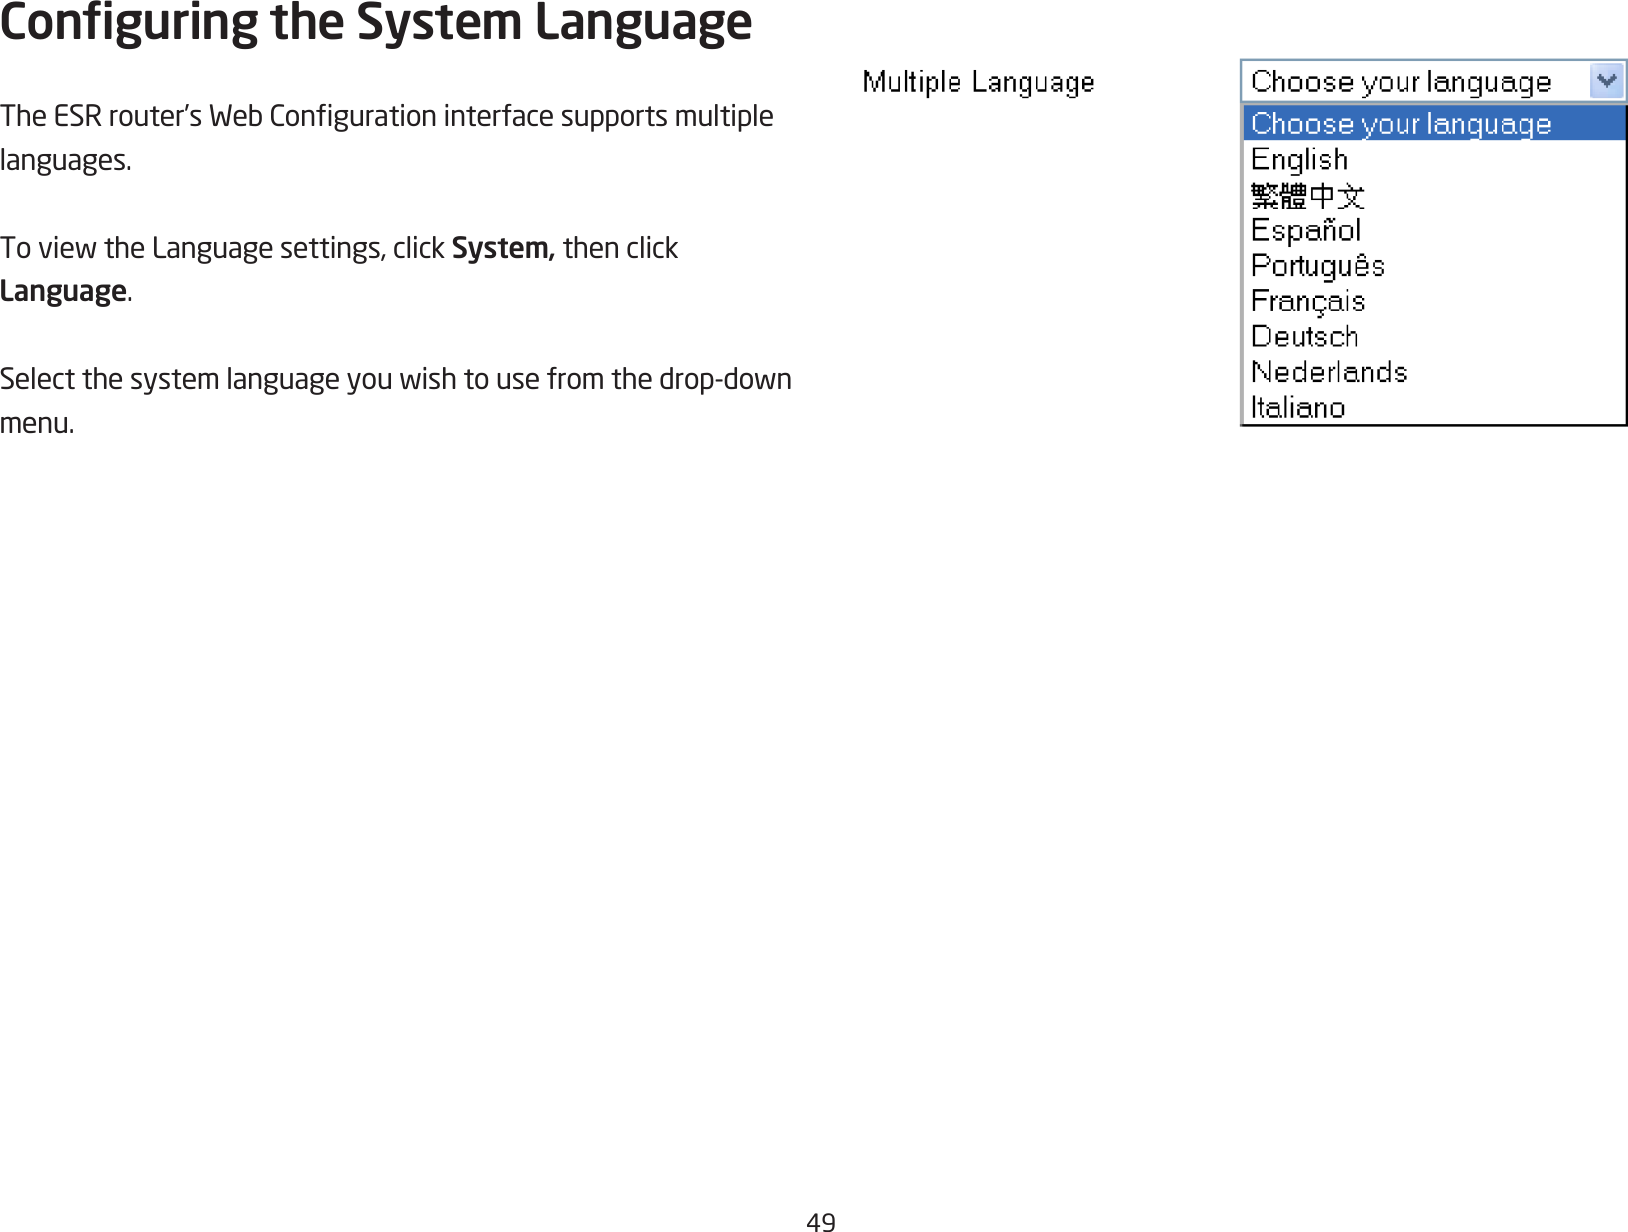 49Conguring the System LanguageTheESRrouter’sWebCongurationinterfacesupportsmultiplelanguages.ToviewtheLanguagesettings,clickSystem, then click Language.Selectthesystemlanguageyouwishtousefromthedrop-downmenu.